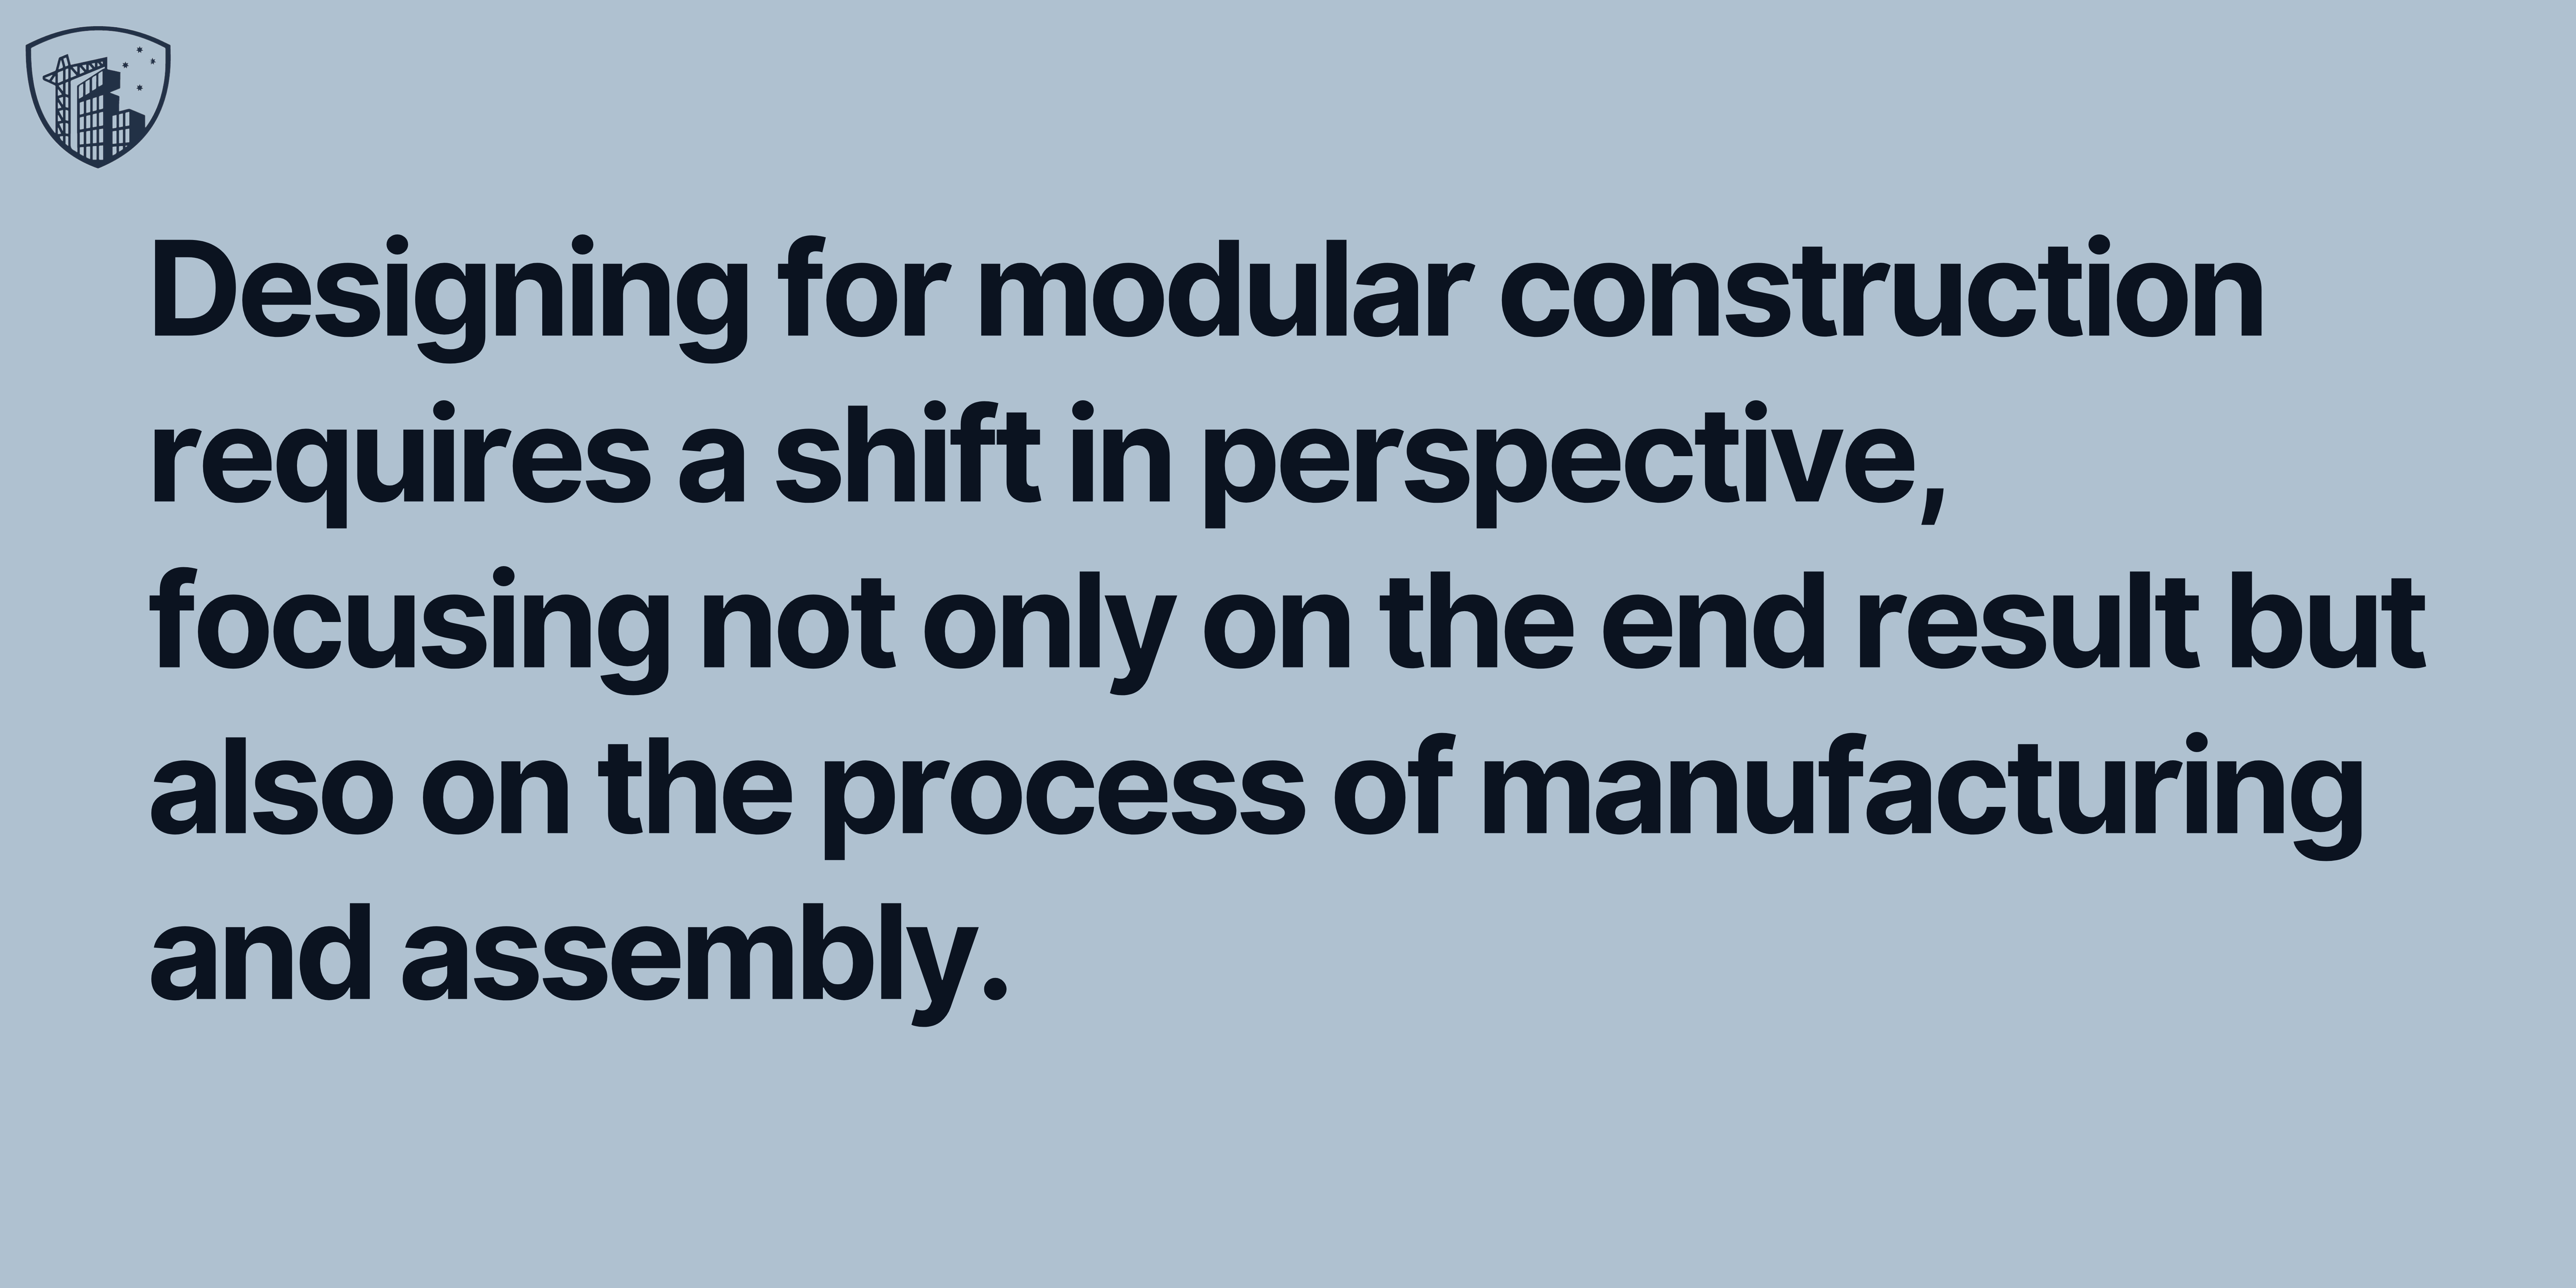 Designing for modular construction requires a shift in perspective, focusing not only on the end result but also on the process of manufacturing and assembly. 